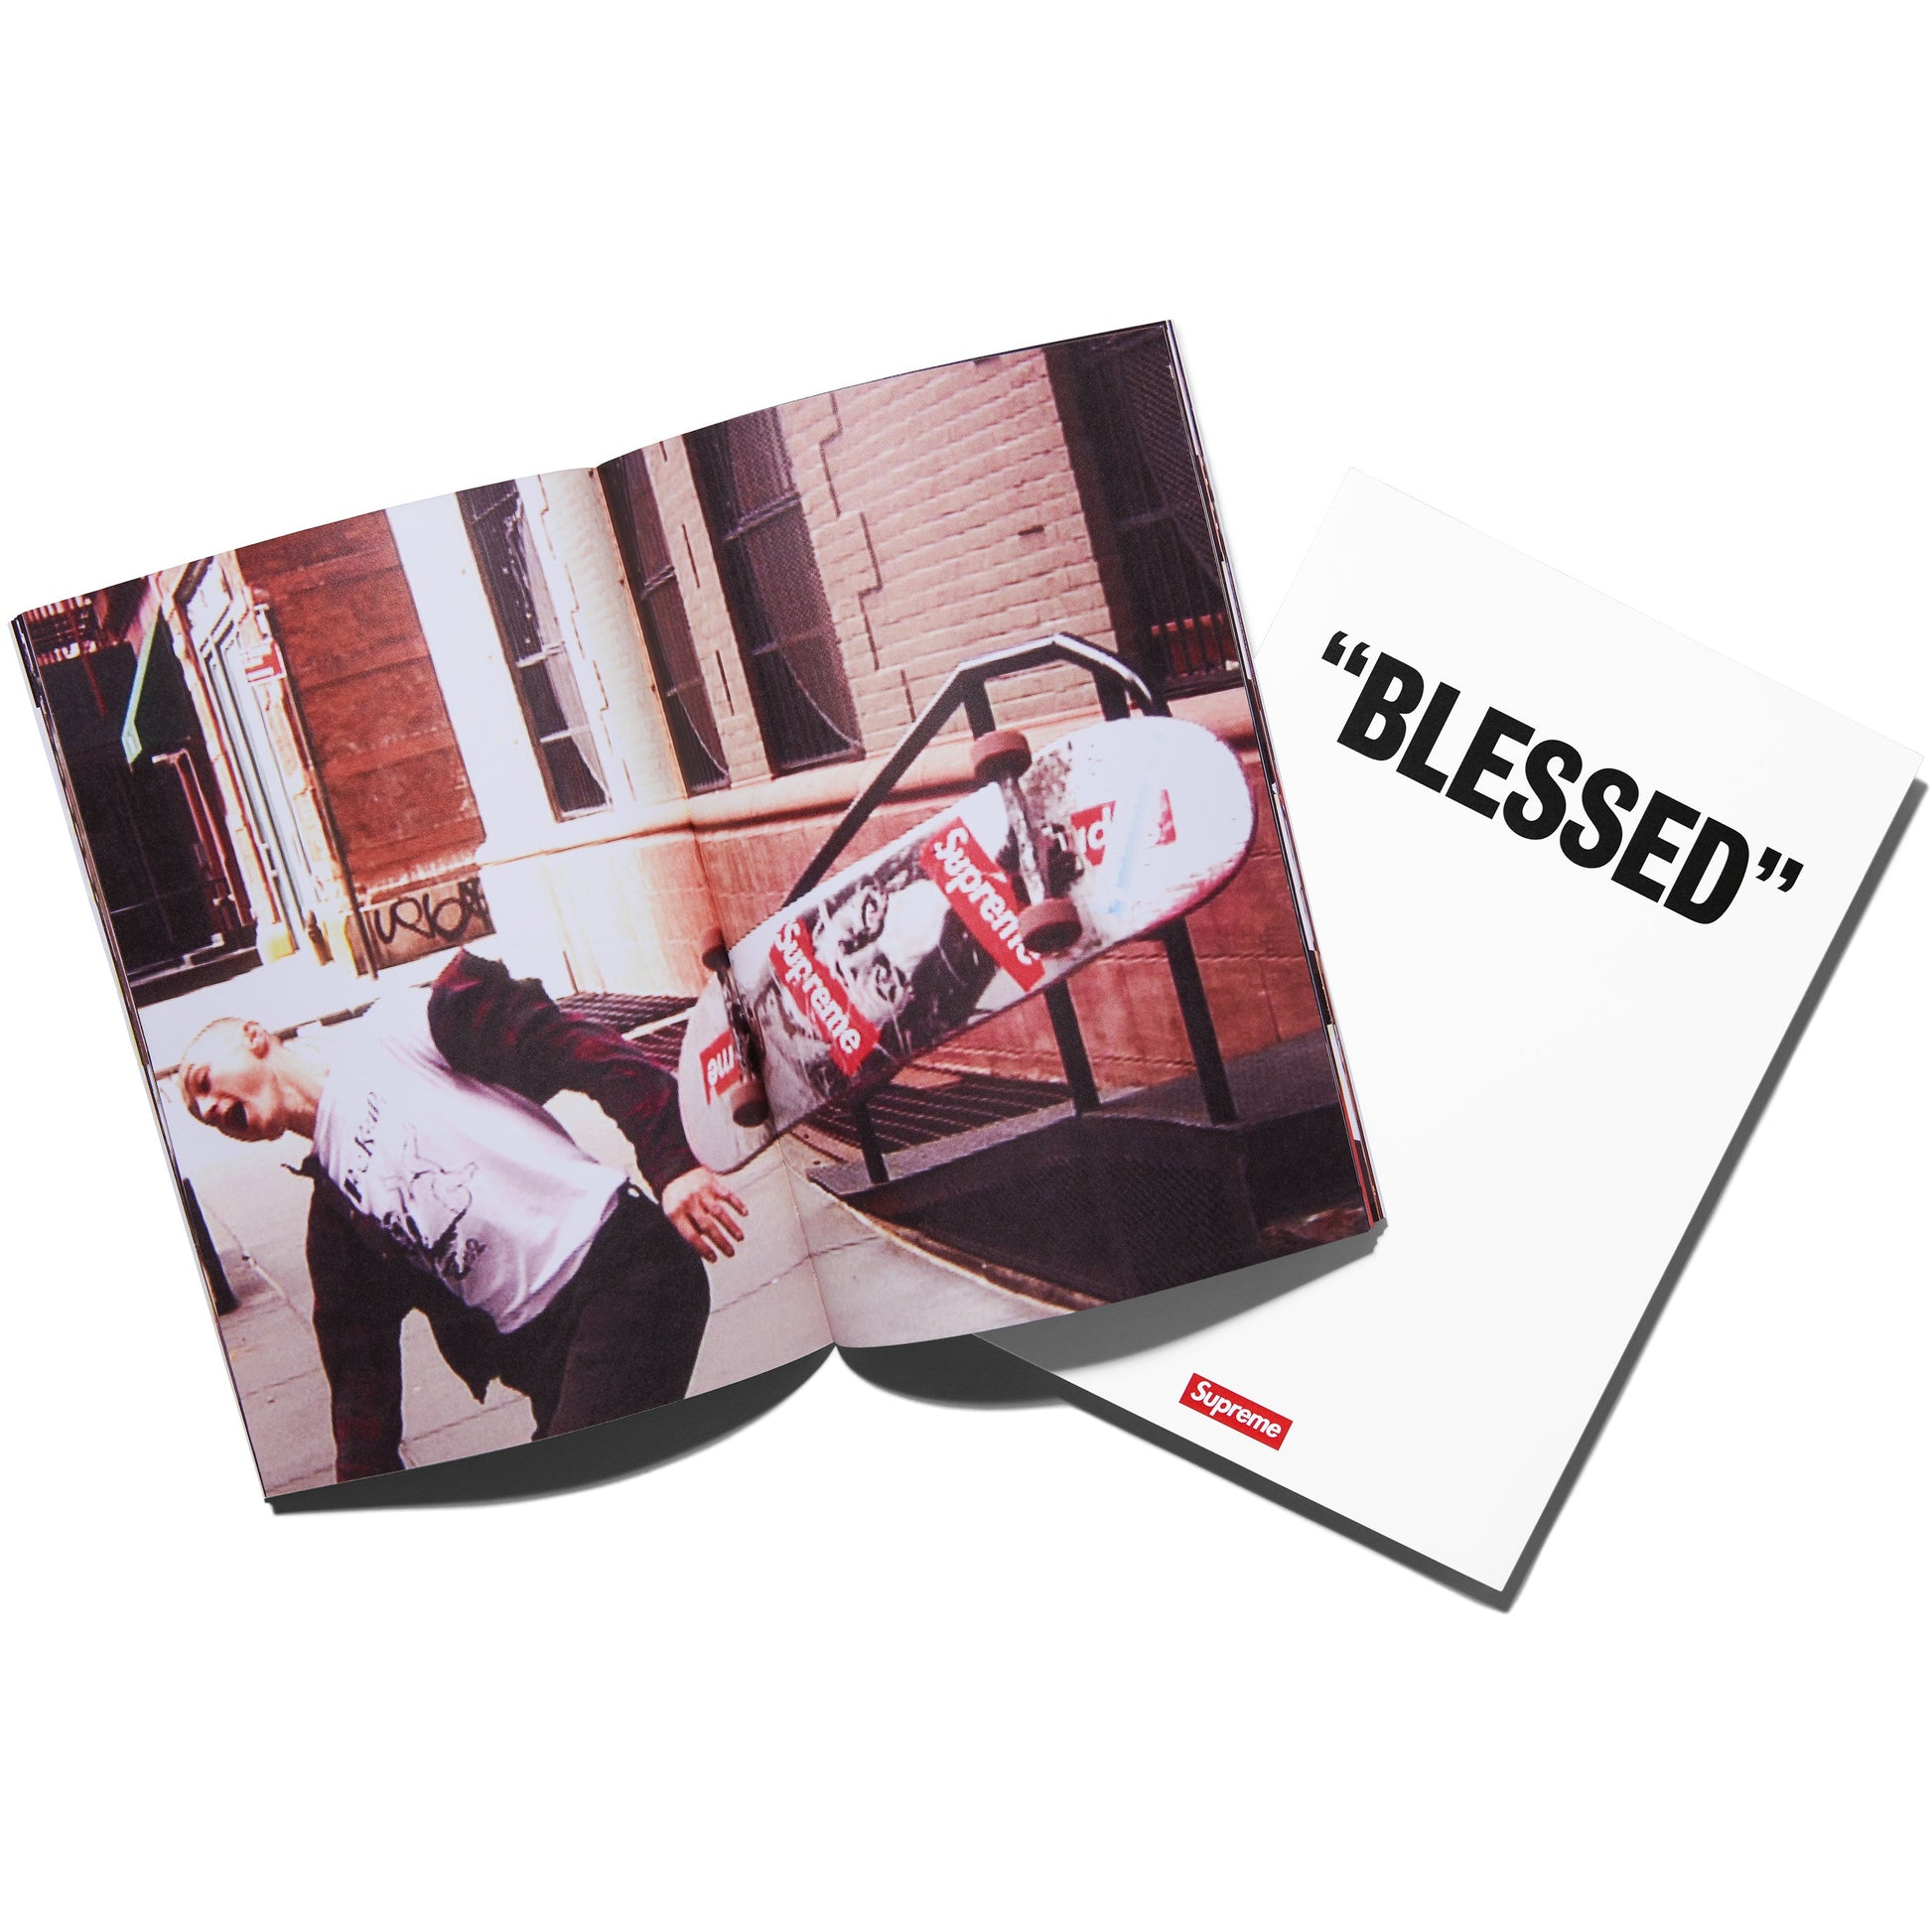 Supreme 'Blessed' DVD & Photobook from Supreme